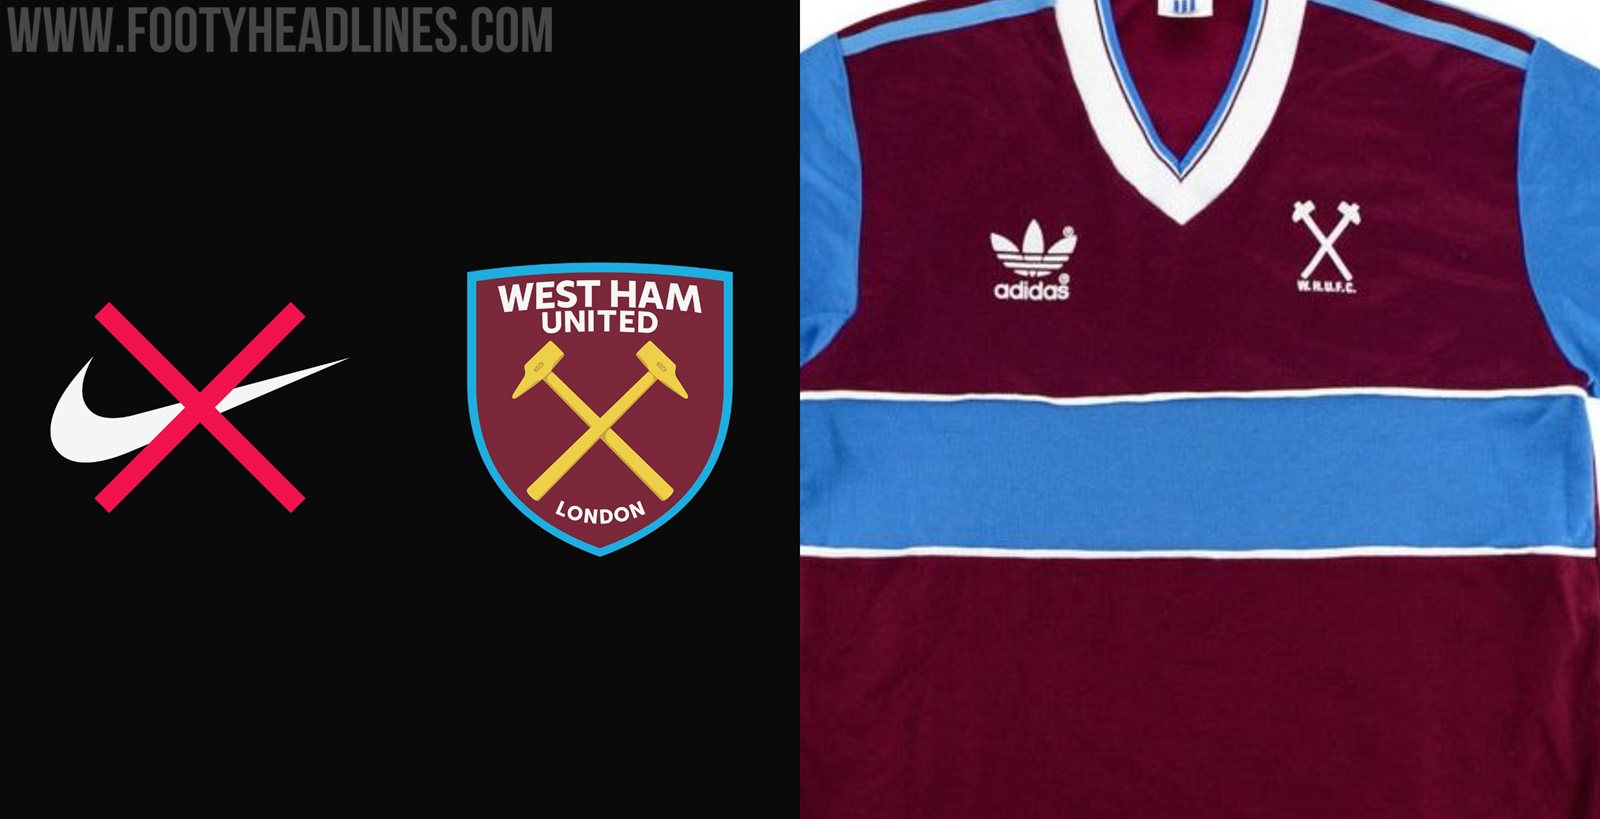 regionaal Asser Minimaal West Ham to Sign No Nike Kit Deal - 23-24 Home Kit Inspired by 83-84 Kit -  Footy Headlines